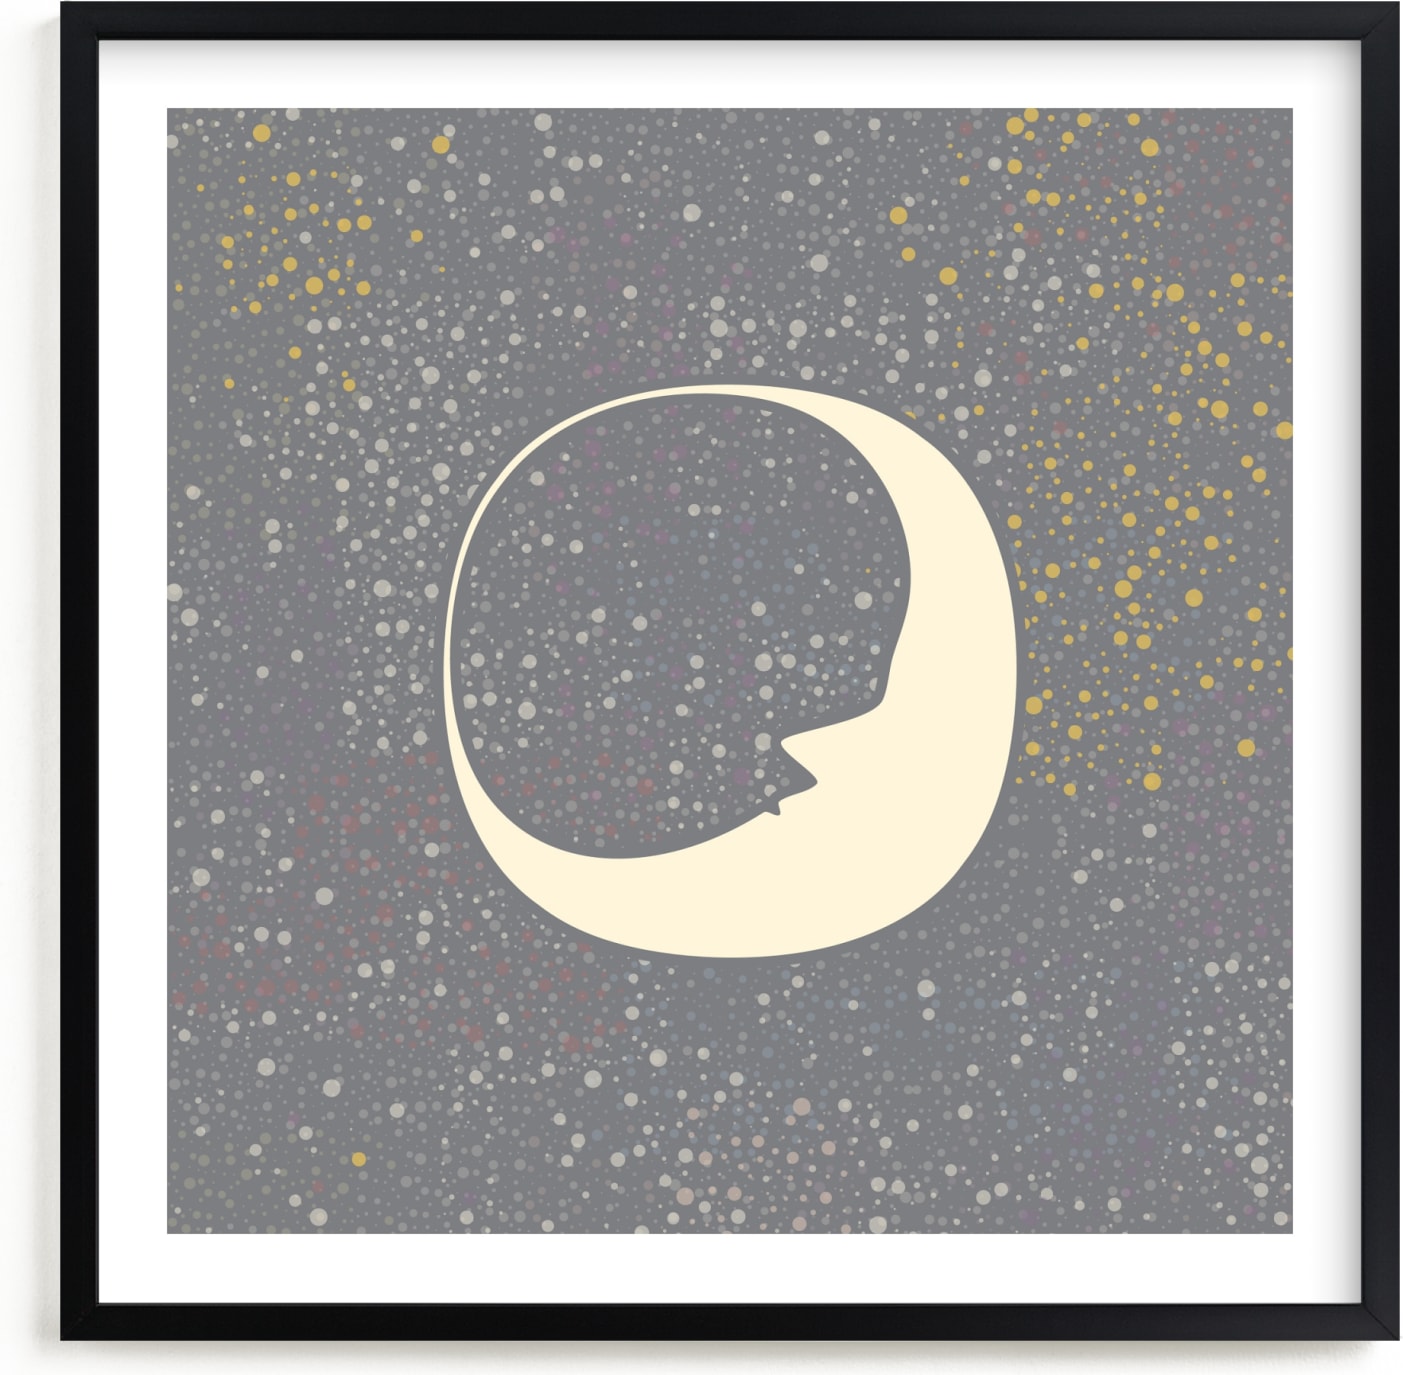 This is a grey nursery wall art by Katherine Morgan called Celestial Moon.